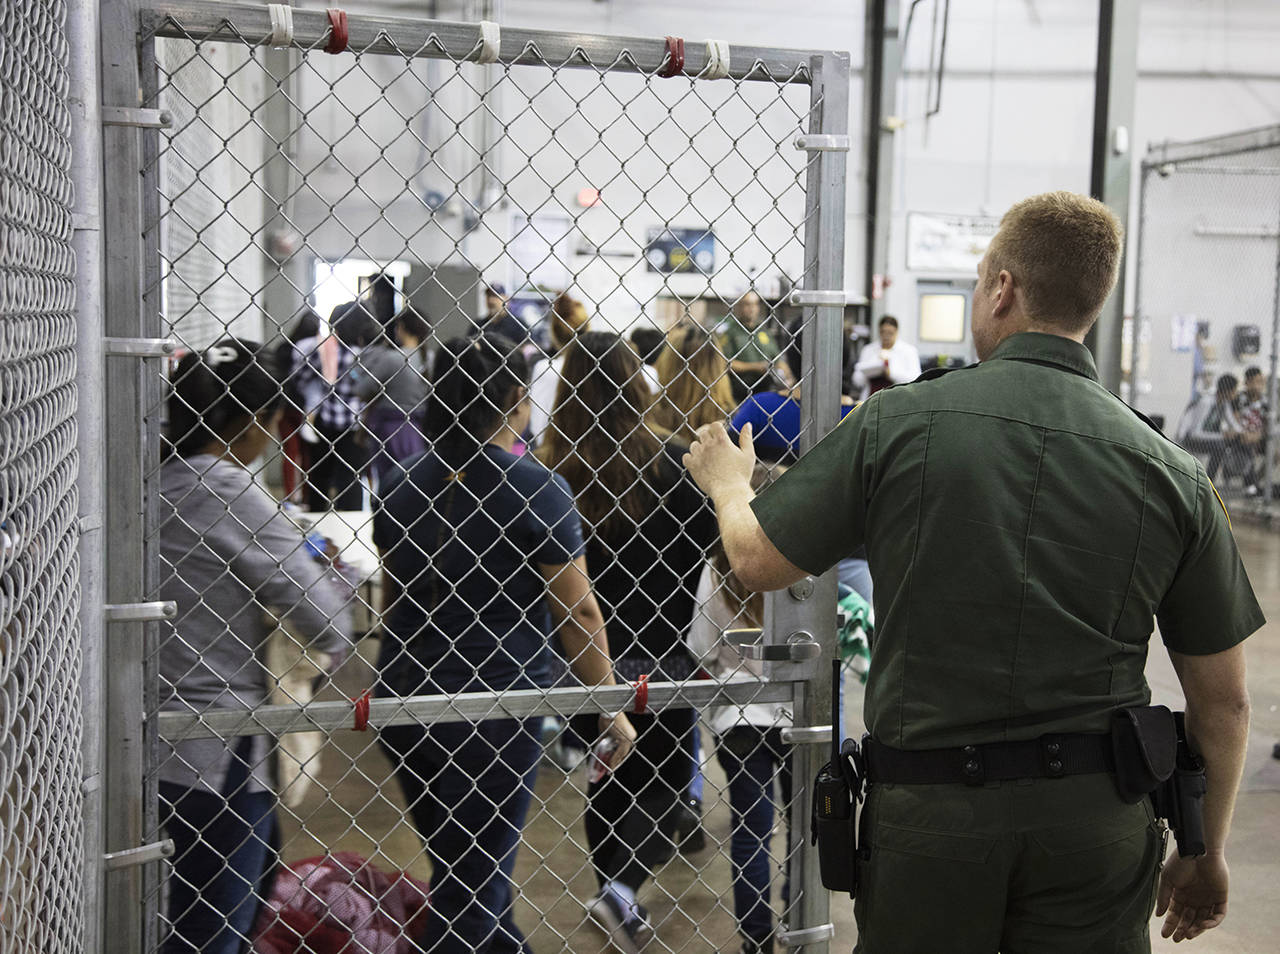 A U.S. Border Patrol agent watches as people who’ve been taken into custody related to cases of illegal entry into the United States stand in line at a facility in McAllen, Texas, on Sunday. (U.S. Customs and Border Protection’s Rio Grande Valley Sector via AP)